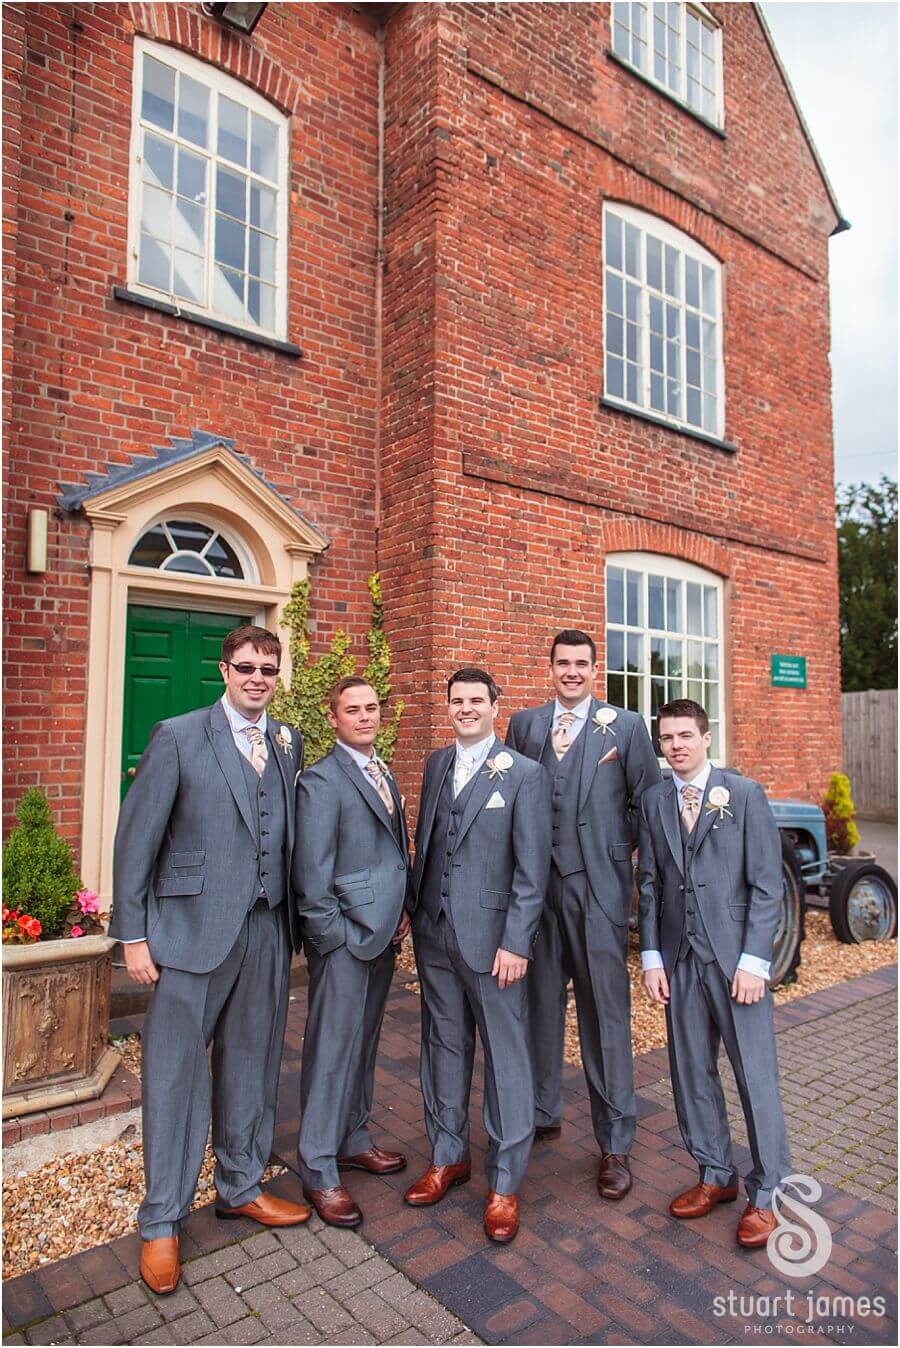 Natural photos telling story of wedding at The Barns in Cannock by Staffordshire Wedding Photographer Stuart James